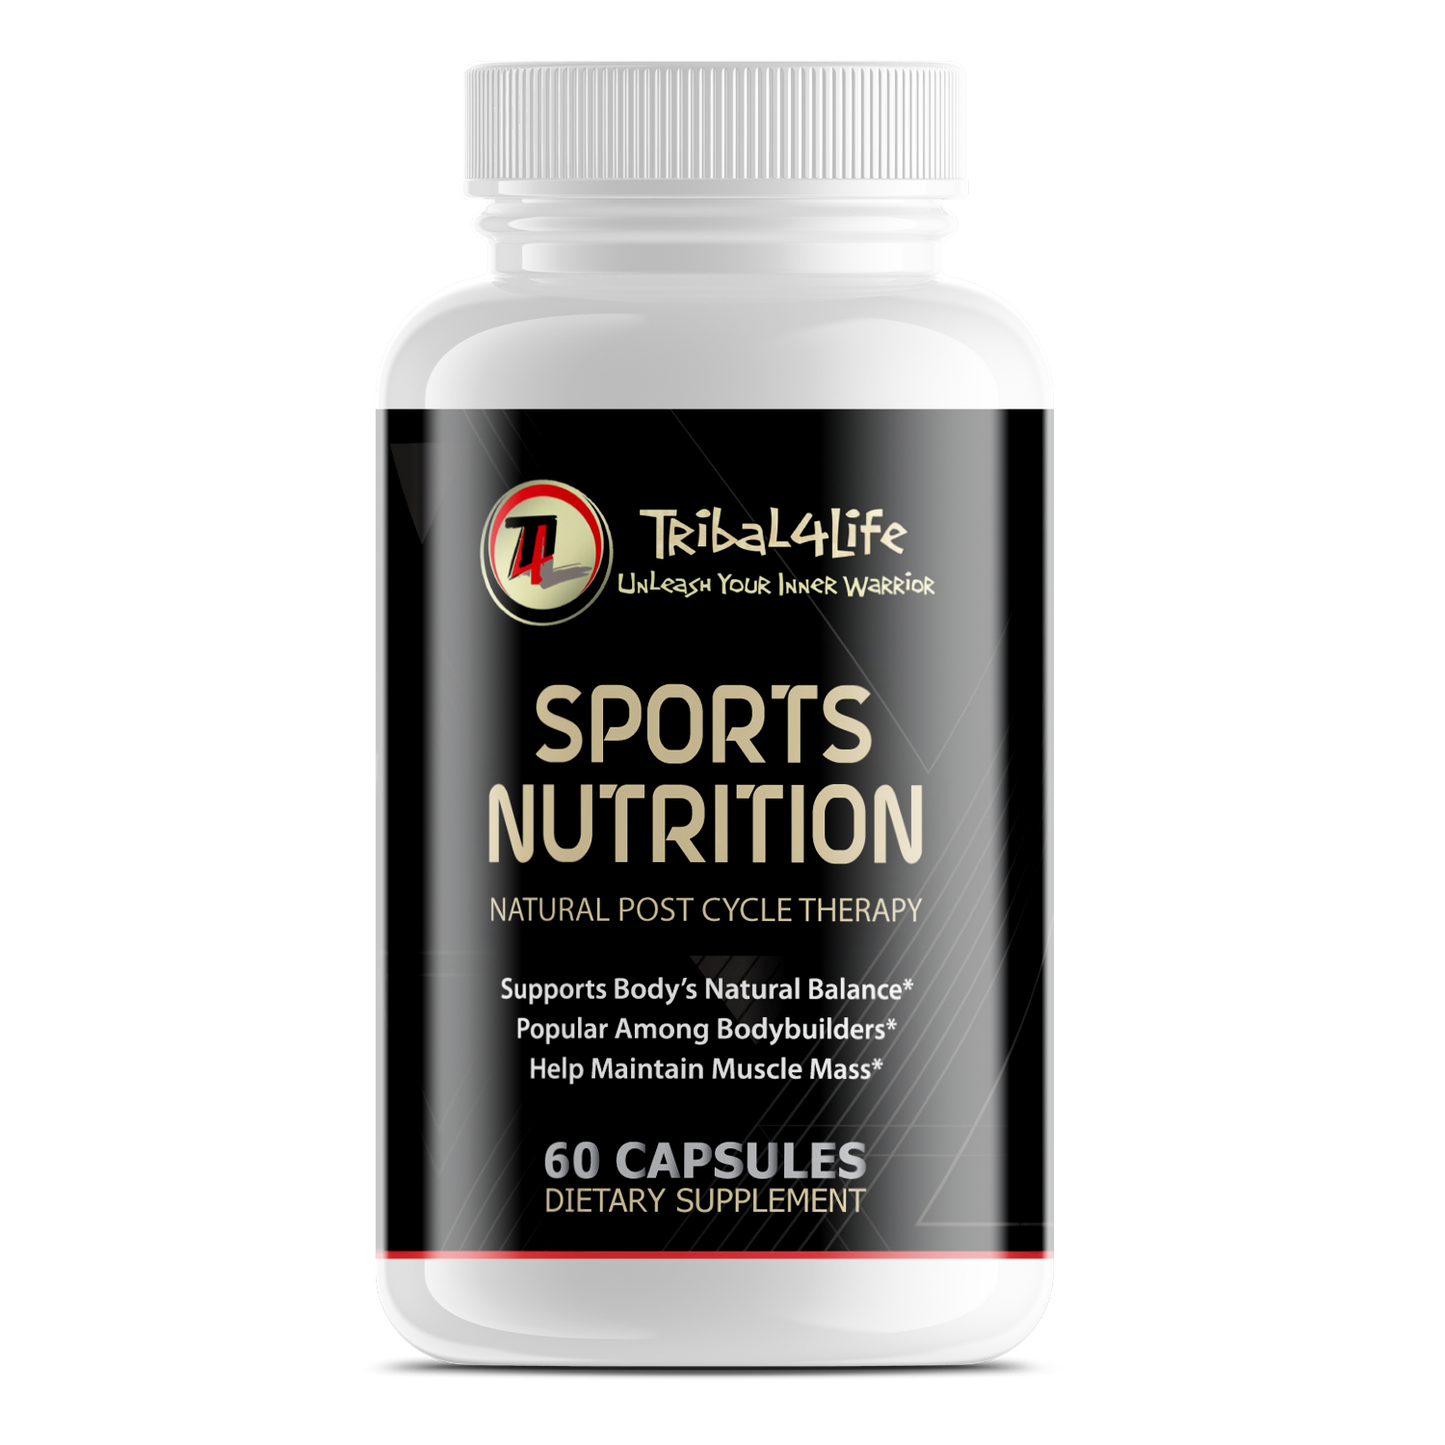 SPORTS NUTRITION - Natural Post Cycle Therapy (PCT)